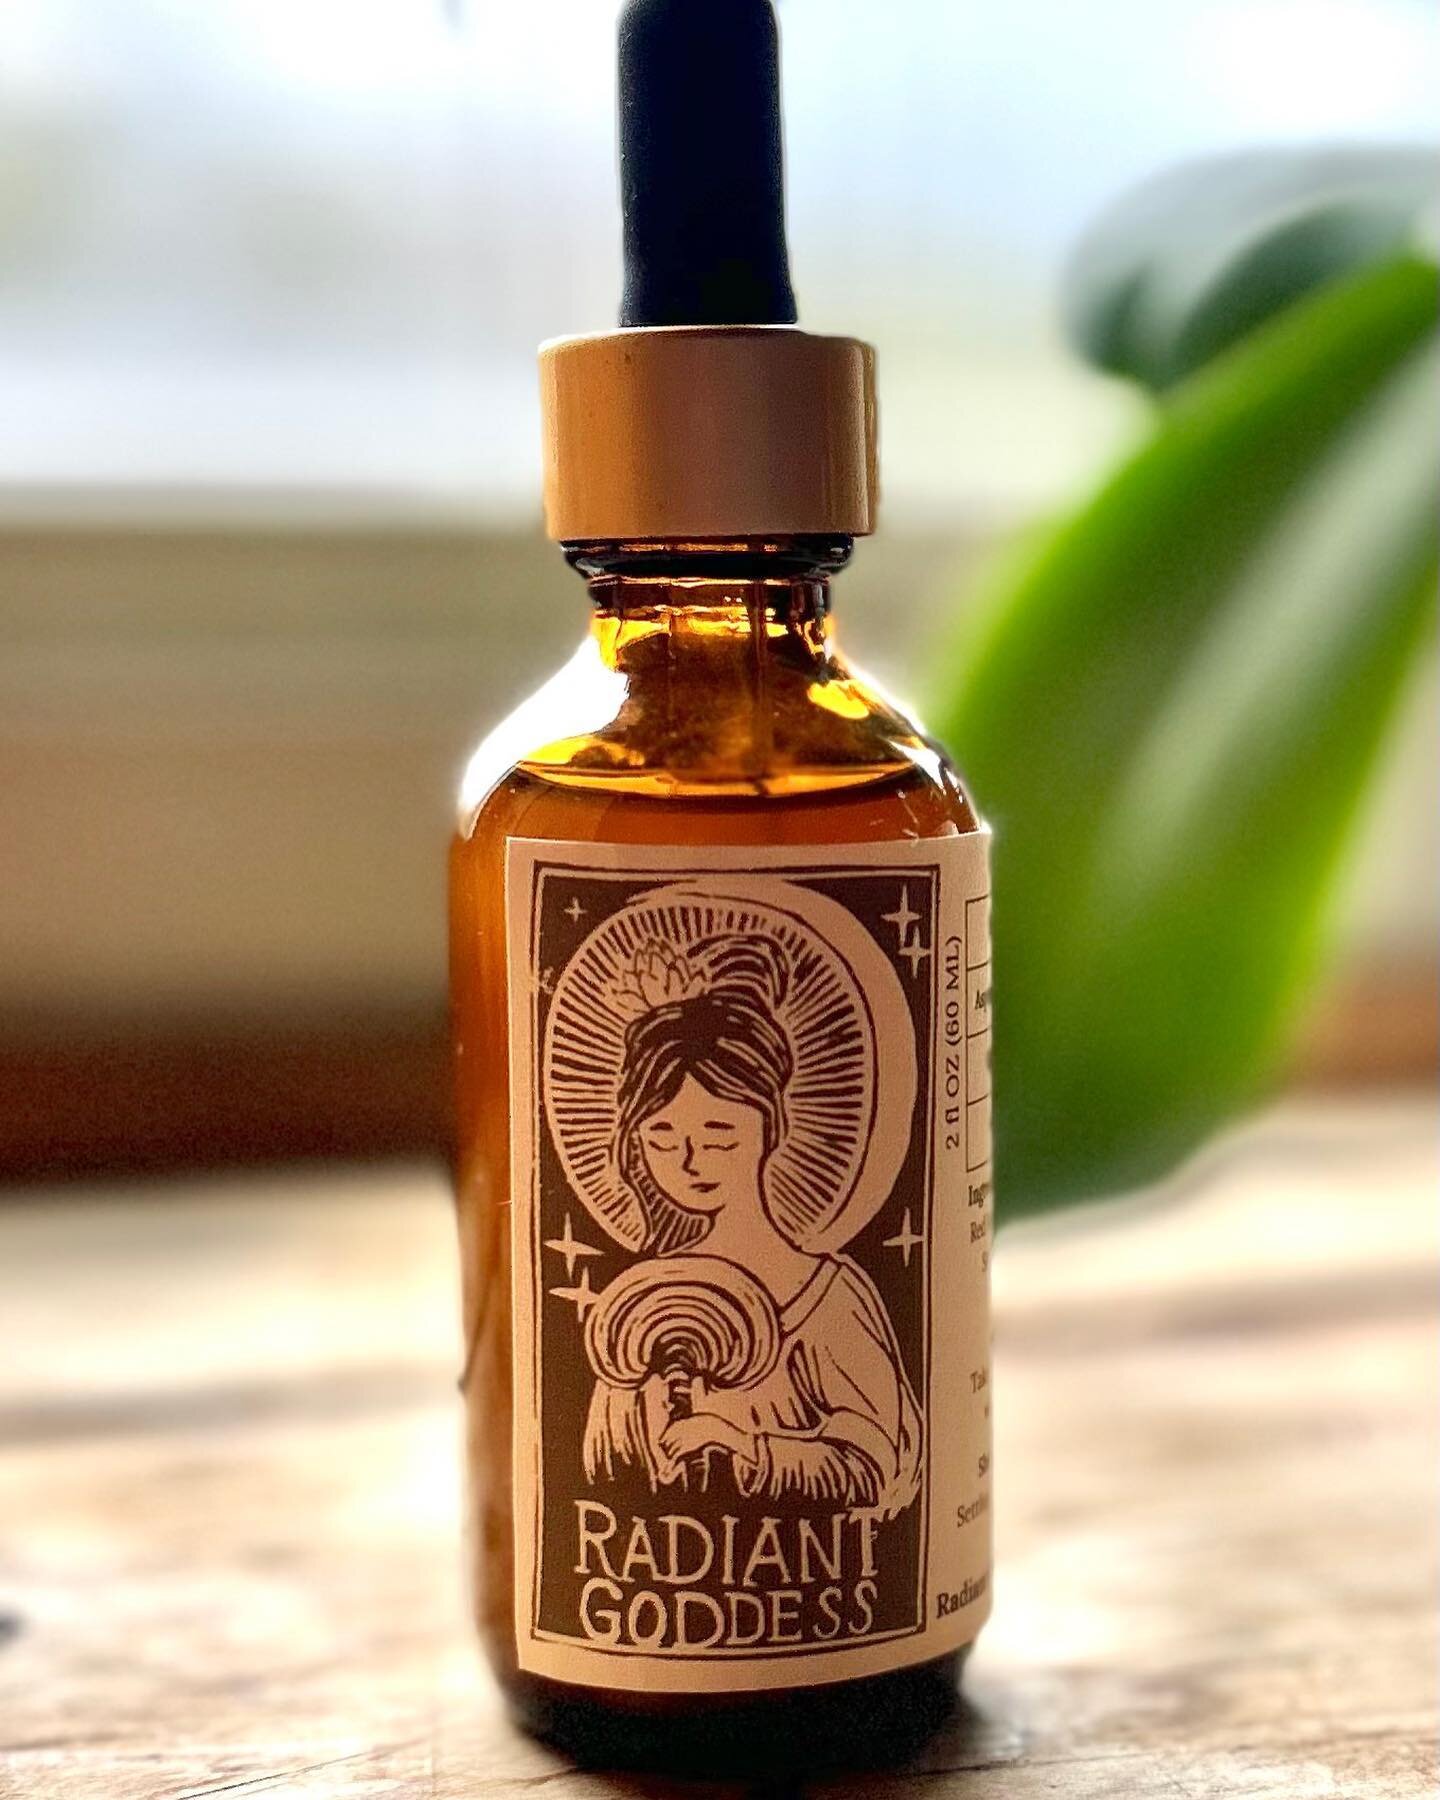 @radiantgardenalchemy ✨
&lsquo; I am an Alchemist that produces fine handcrafted, traditional spagyric Elixirs from tonic herbs/mushrooms of ancient medical traditions. My labels are all hand carved stamps. &lsquo;

Have plans this weekend to kick of